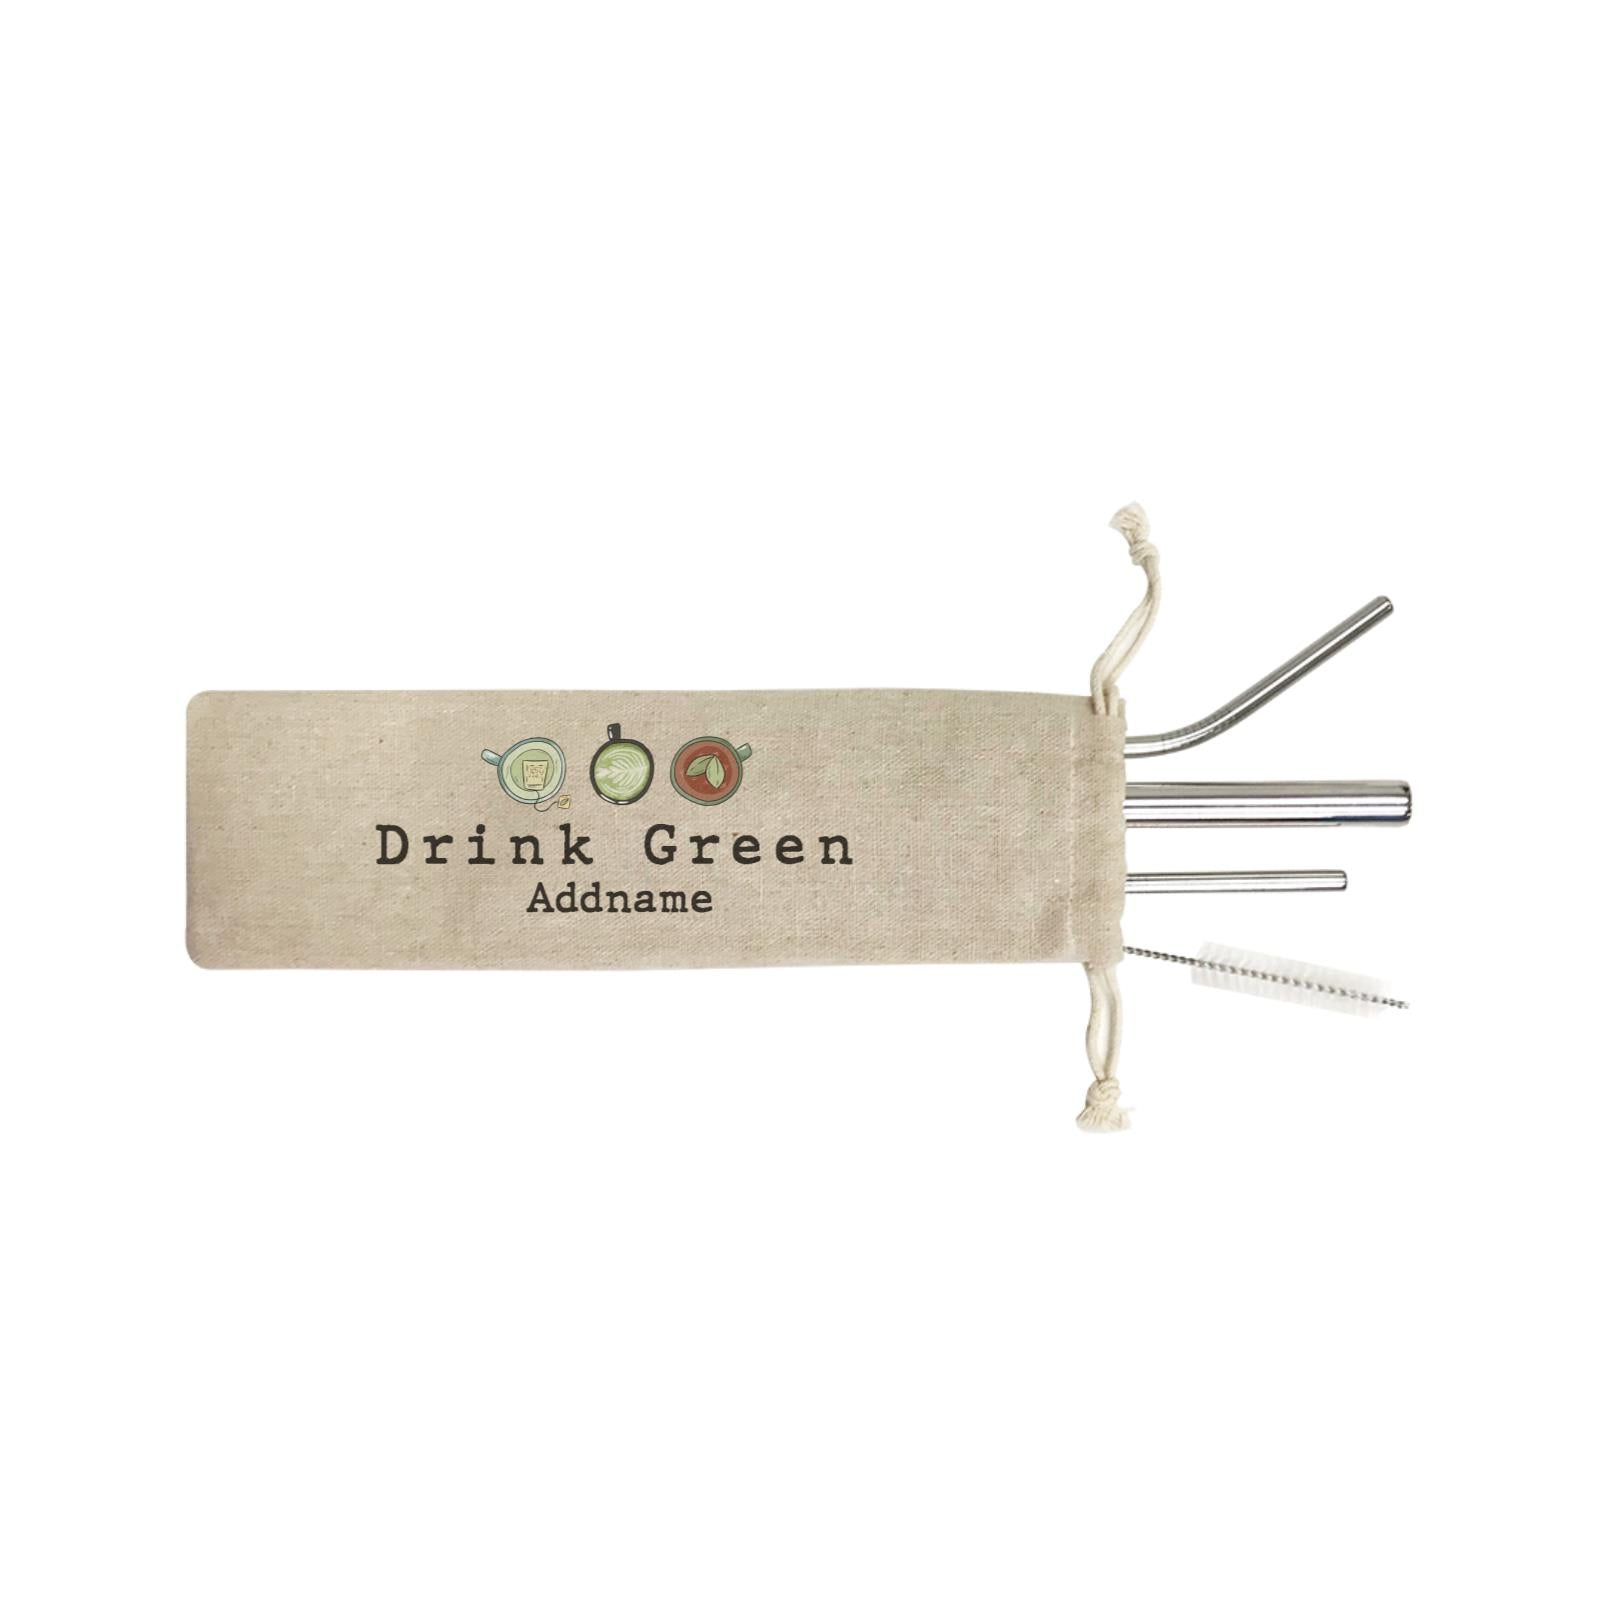 Go Green Recycle Drink Green Drinks Top View Addname SB 4-in-1 Stainless Steel Straw Set In a Satchel